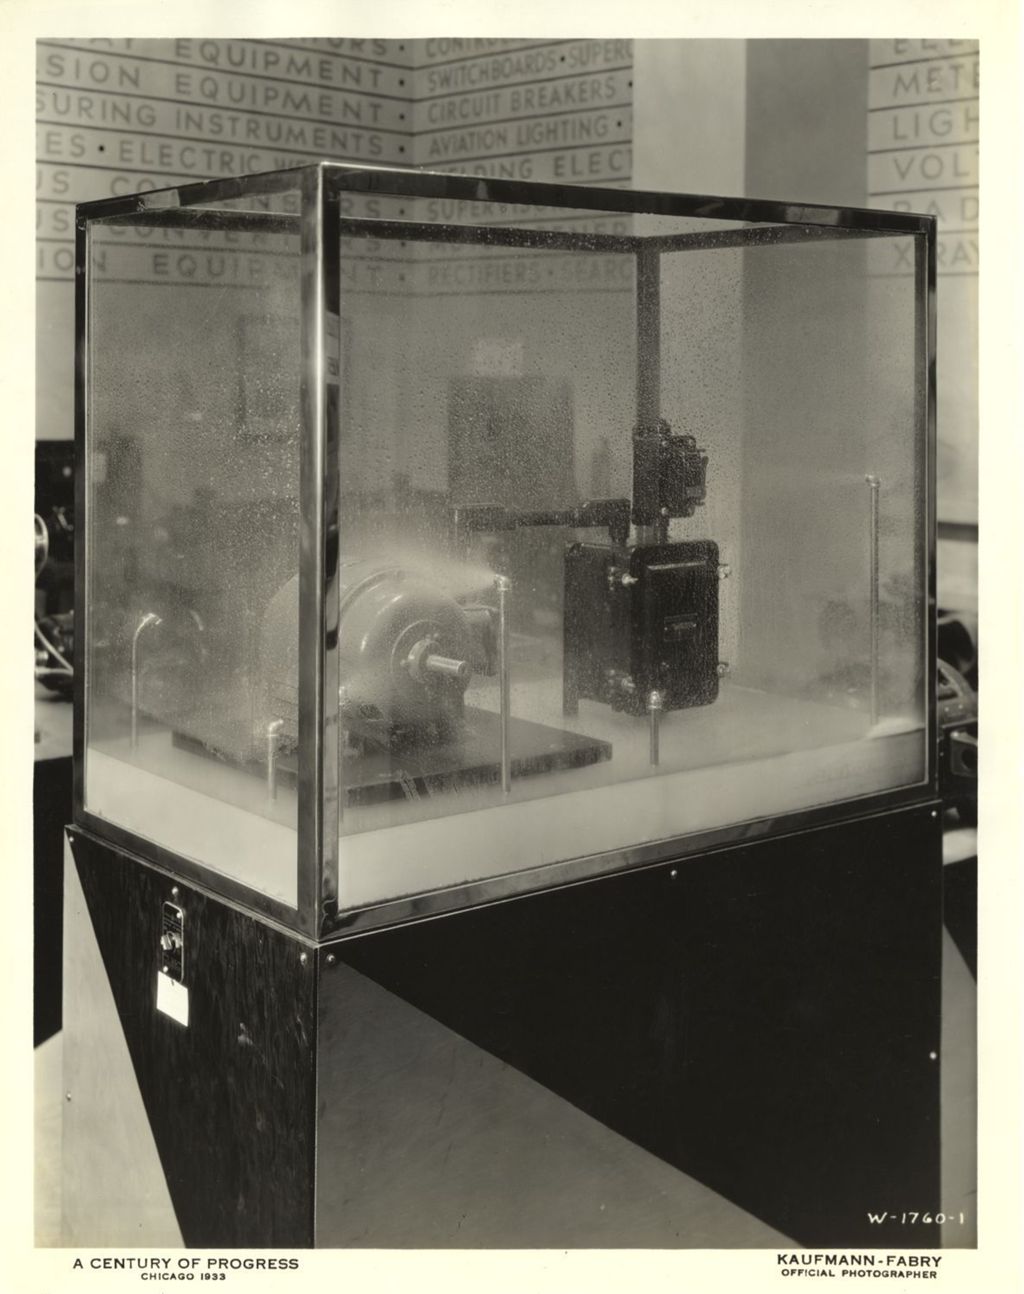 Miniature of Motor and control equipment demonstrates its suitability